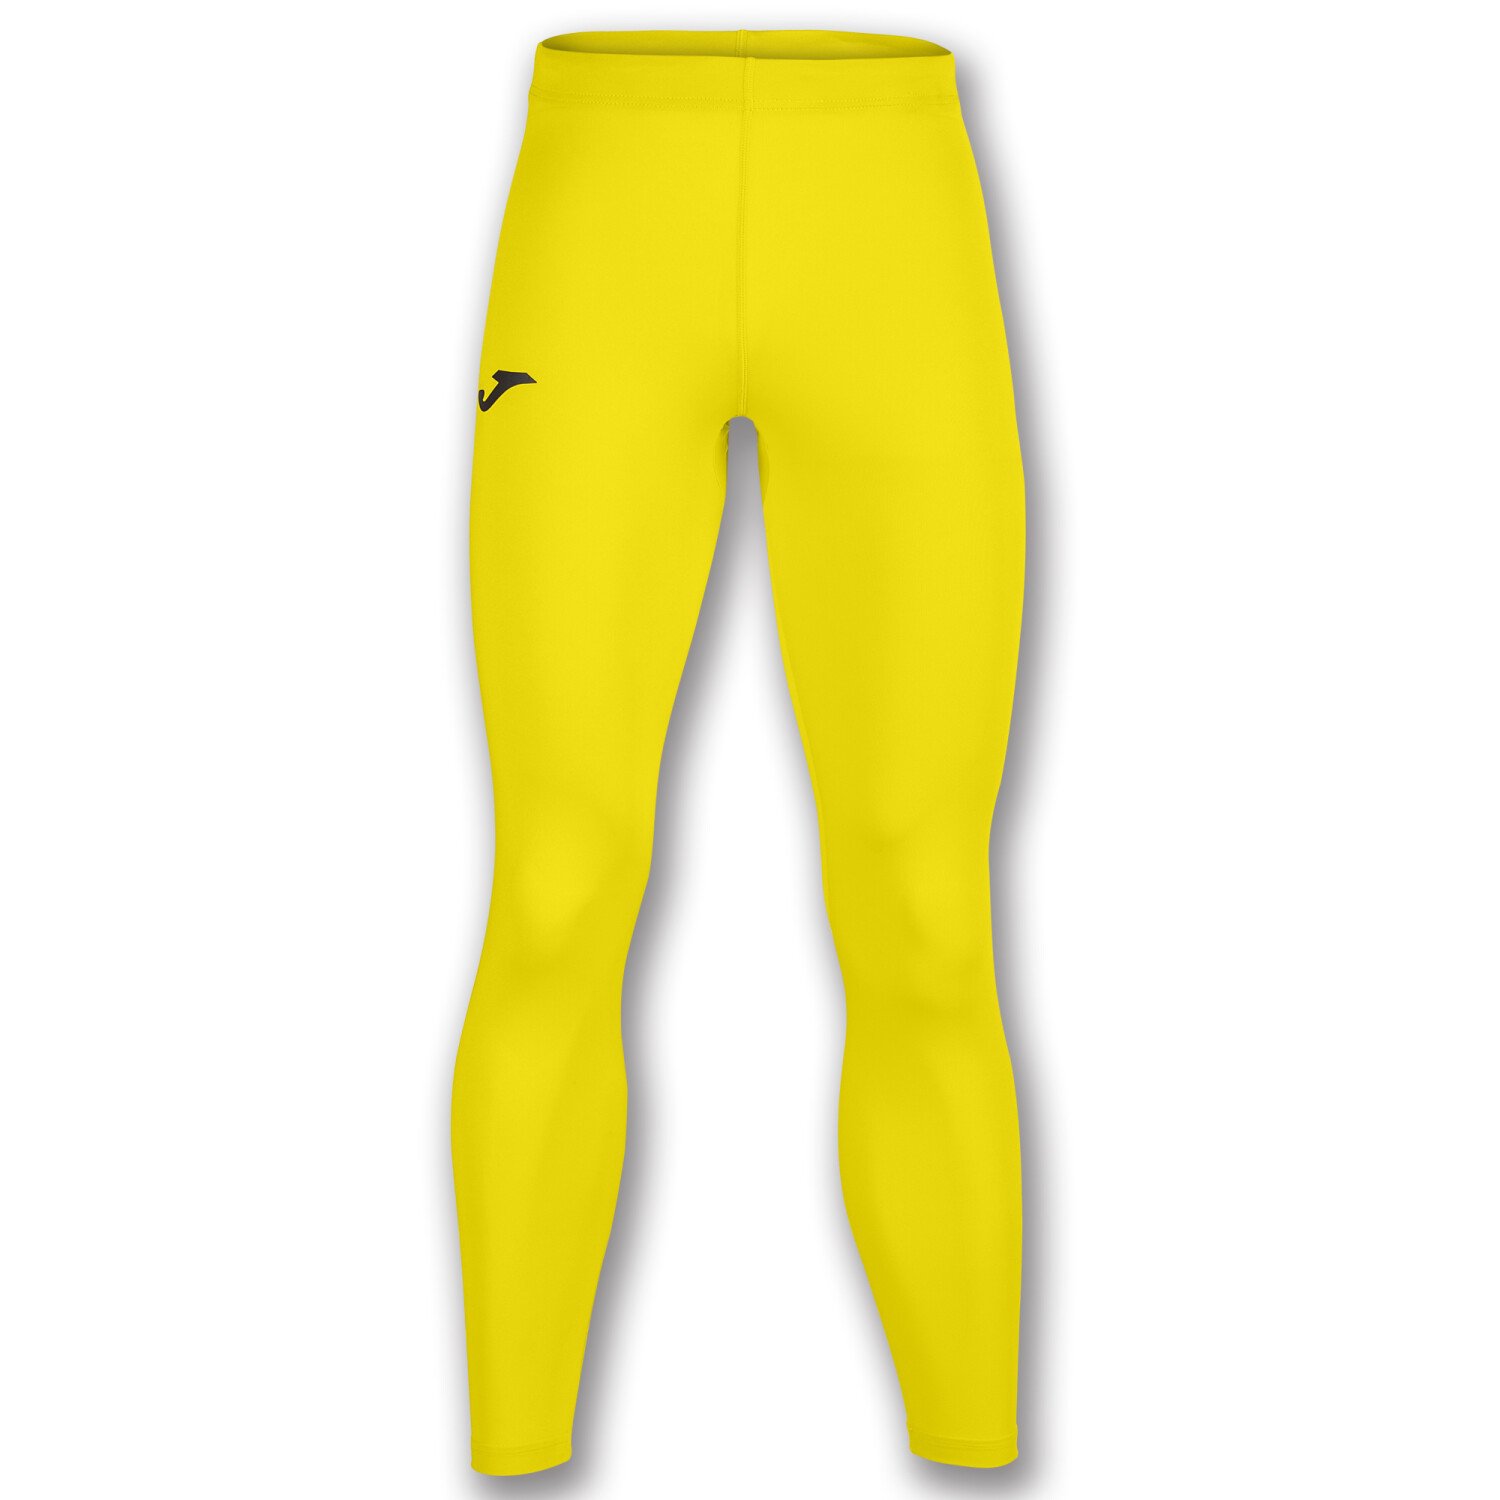 https://www.totalfootballdirect.com/Cache/Images/Joma-Brama-Academy-Thermal-Long-Tights-Yellow-opaque-1500x1500.jpg